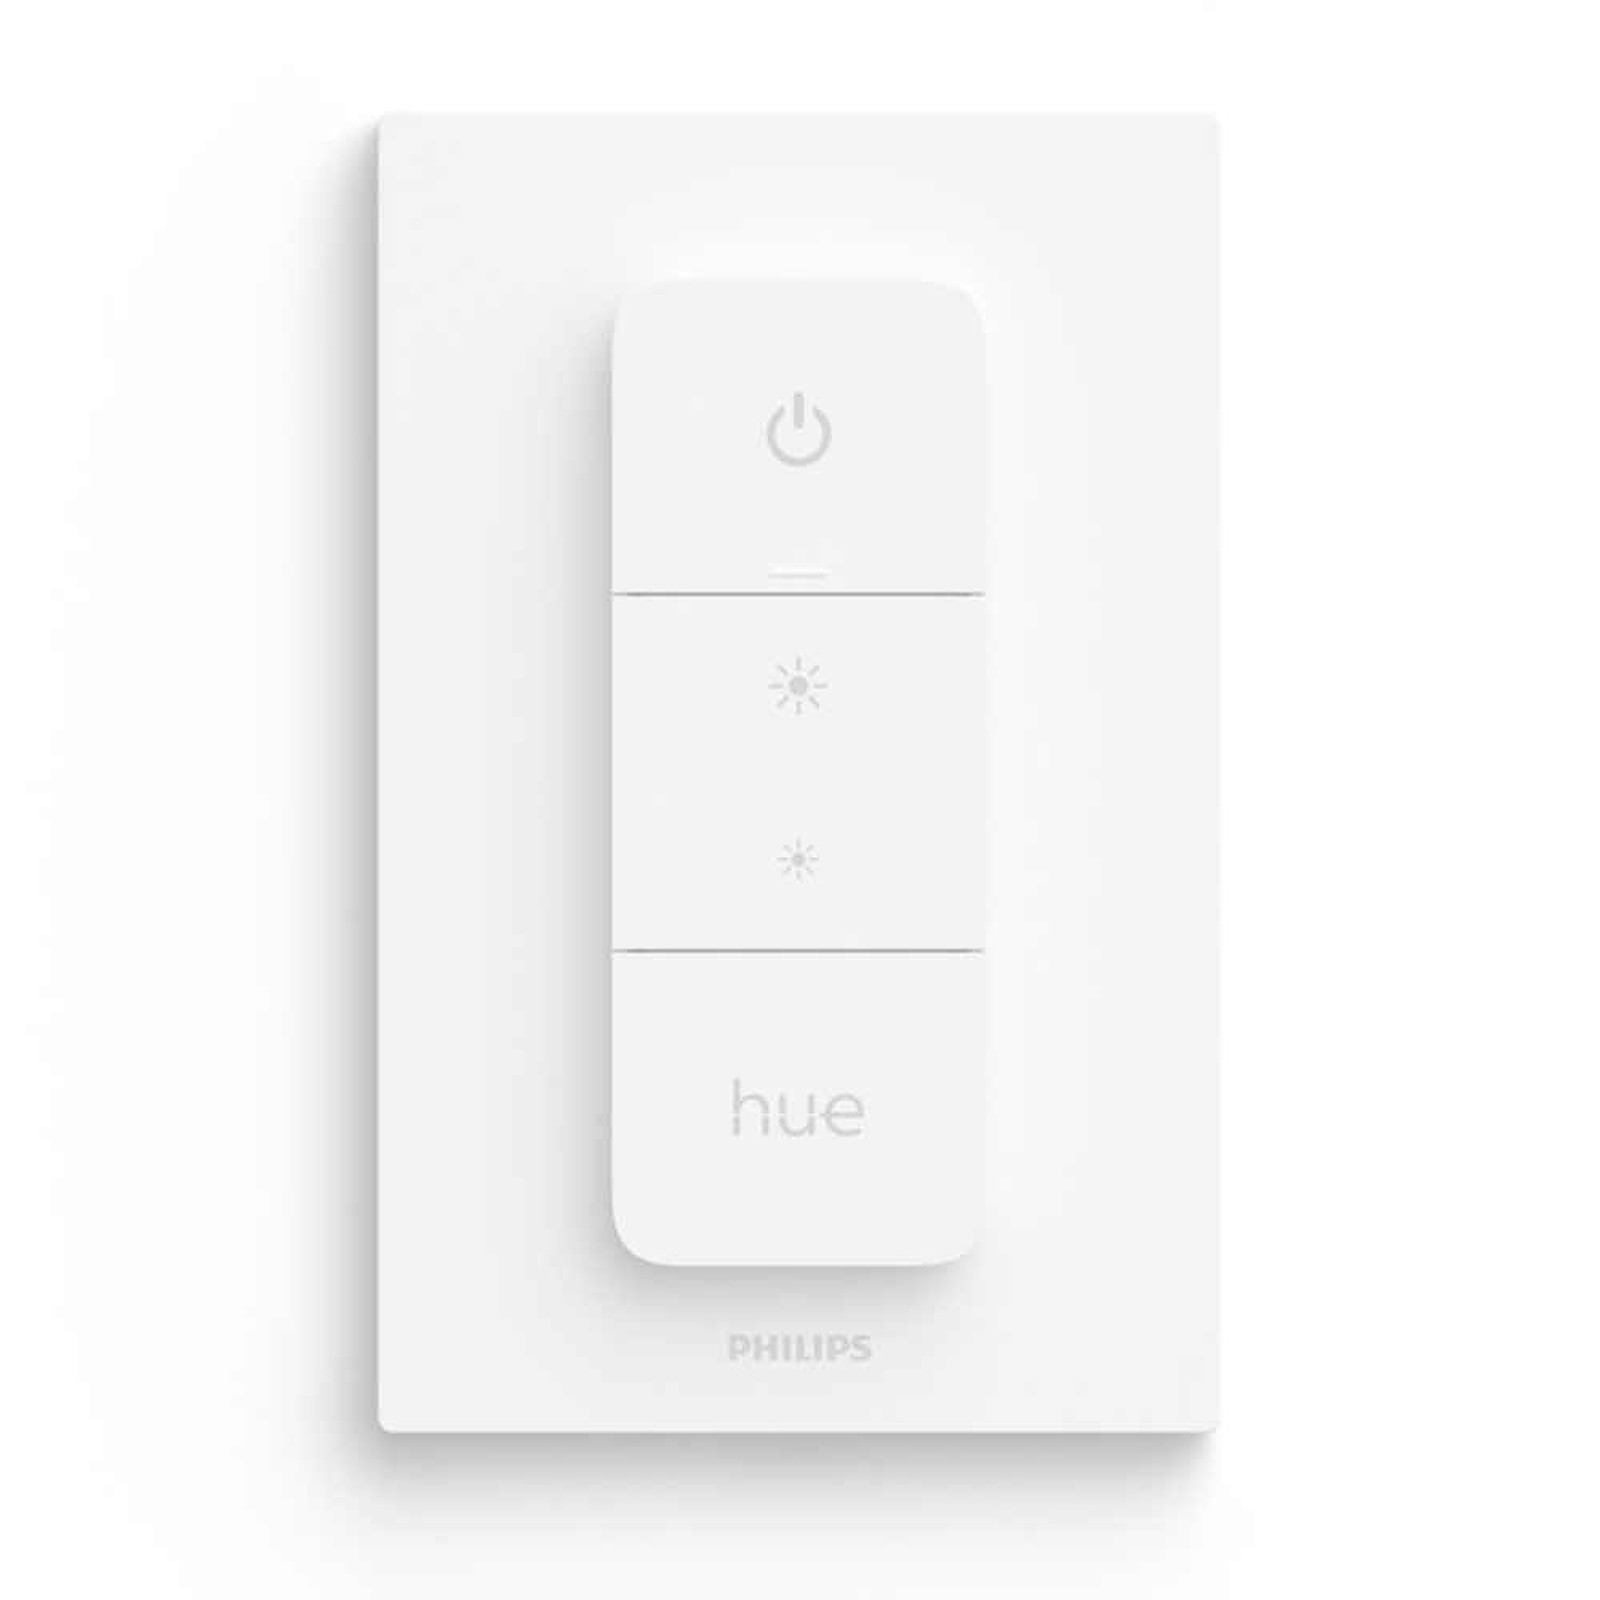 Philips Hue Dimmer switch - Accessoire eclairage connecte Philips